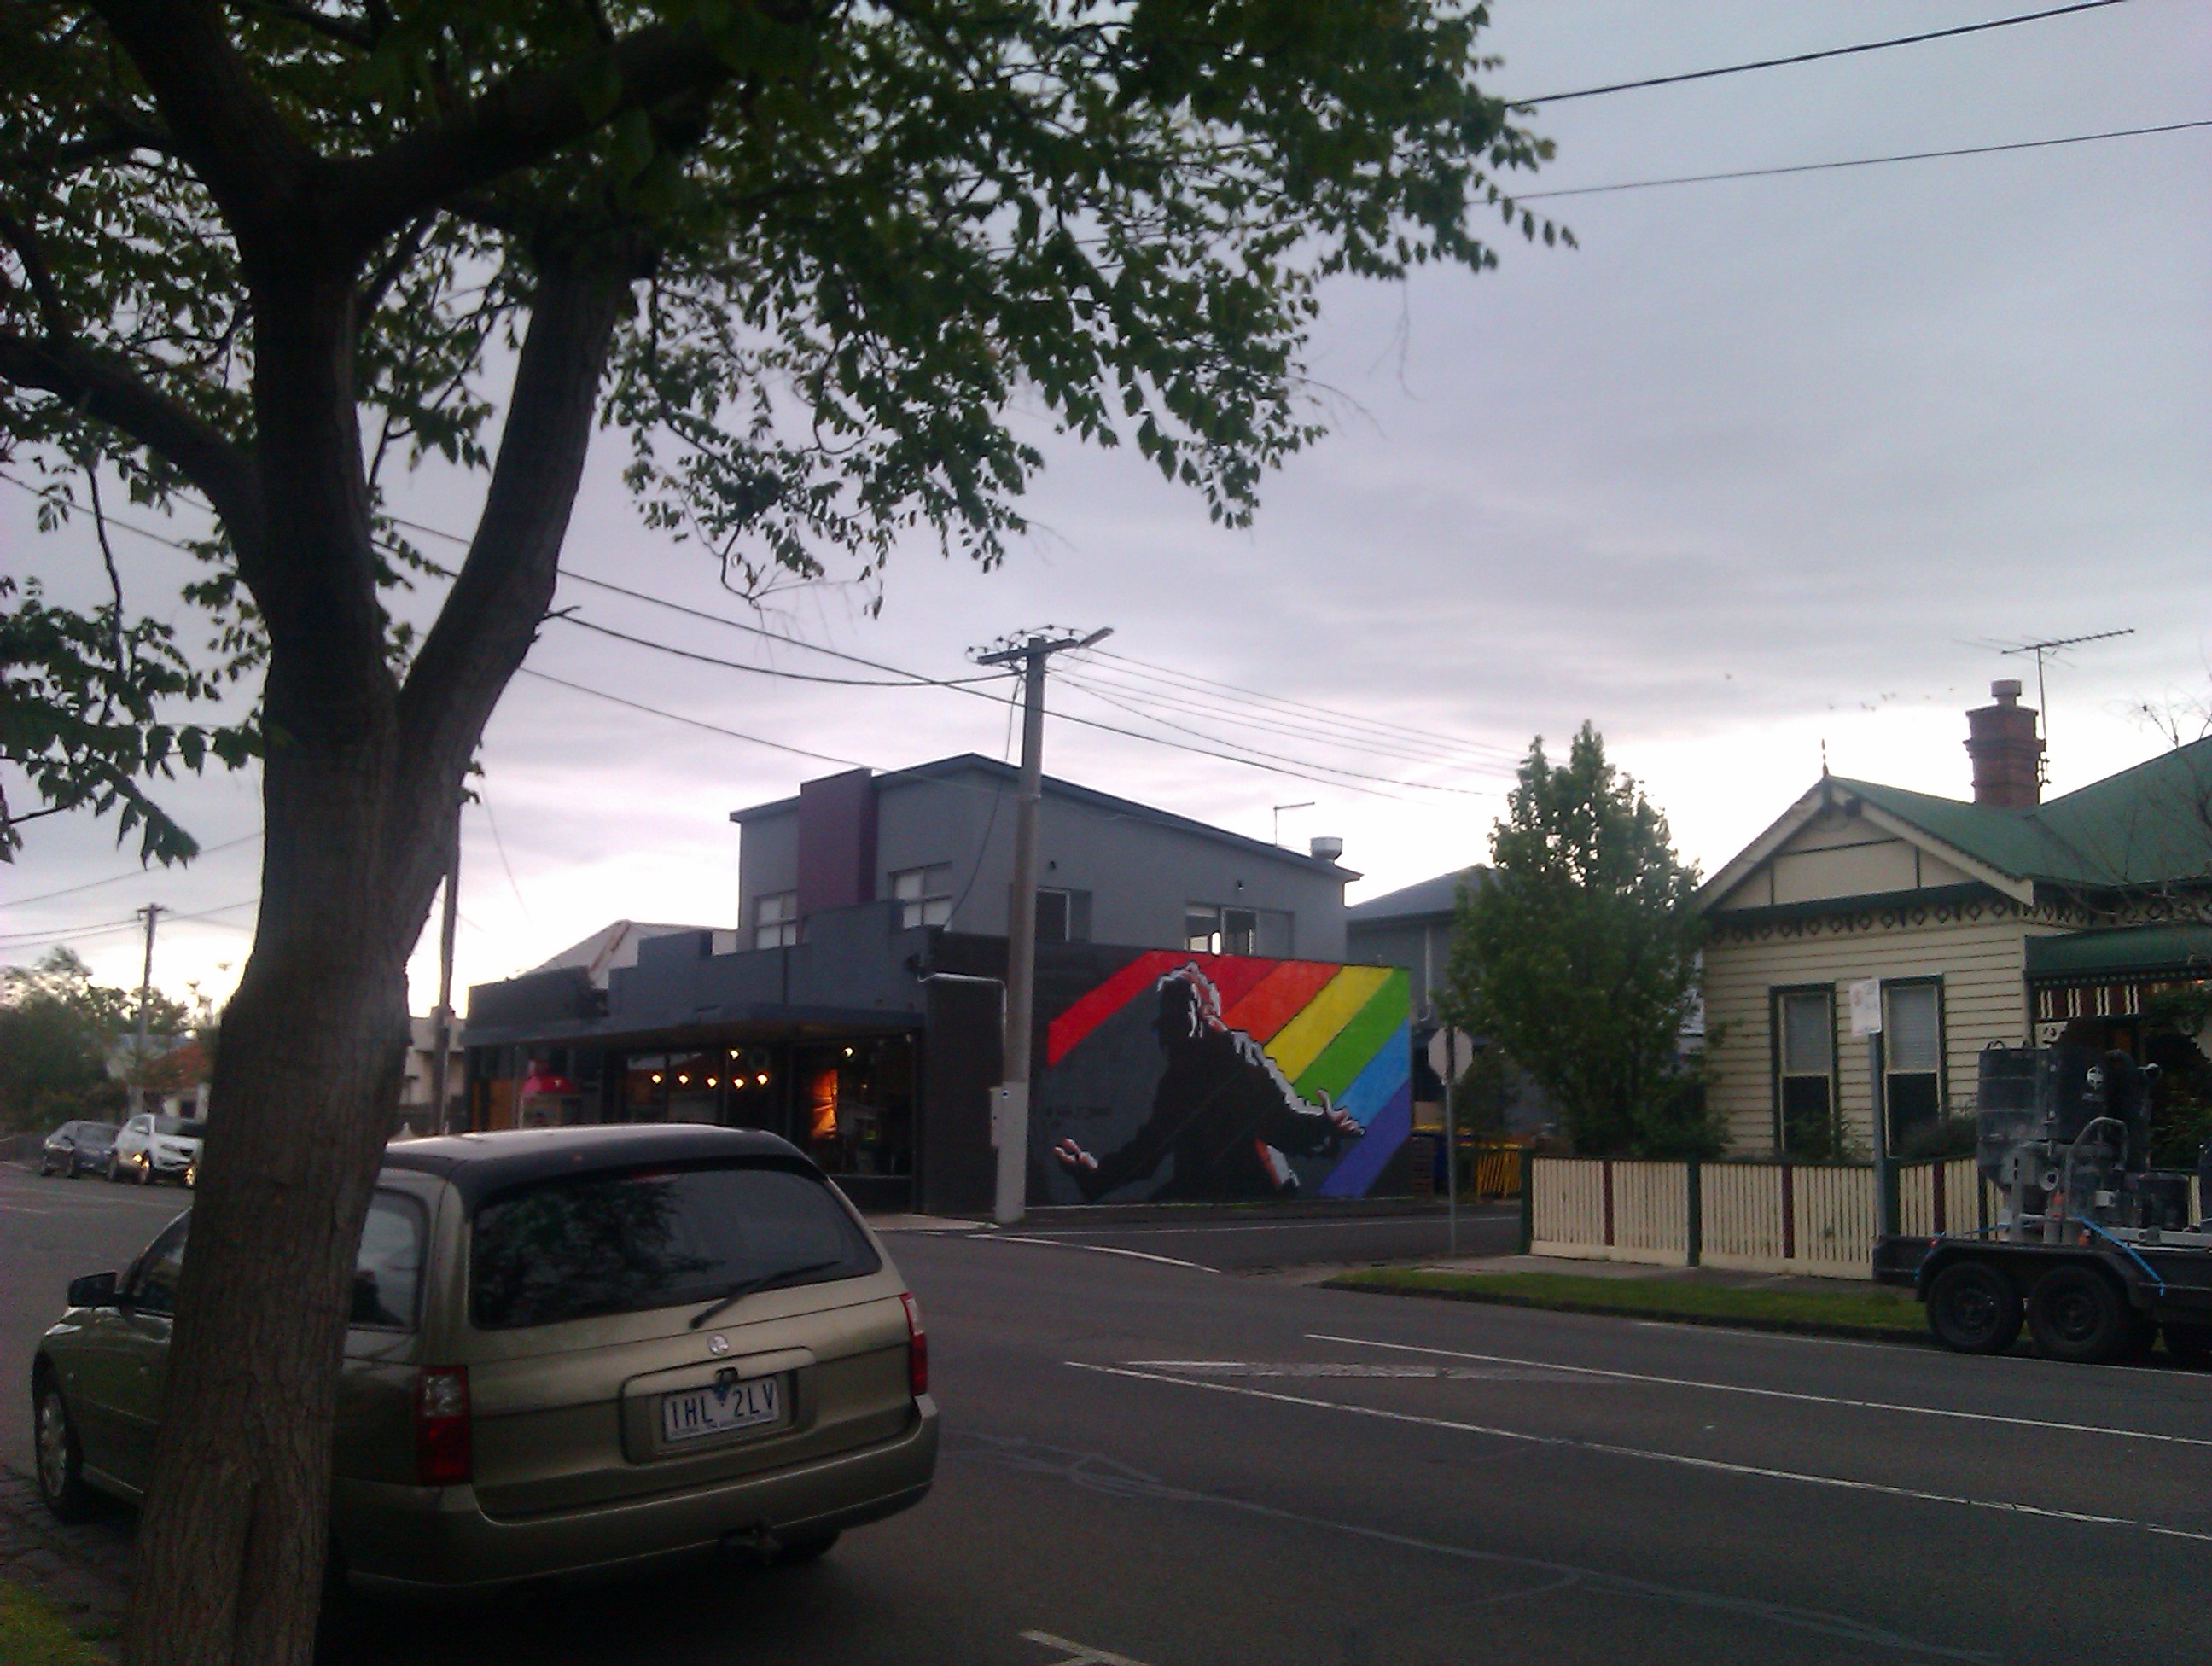 west 48 cafe footscray van graffiti LGBTIQA+ gay marriage plebiscite in Australia christians for marriage equality ally